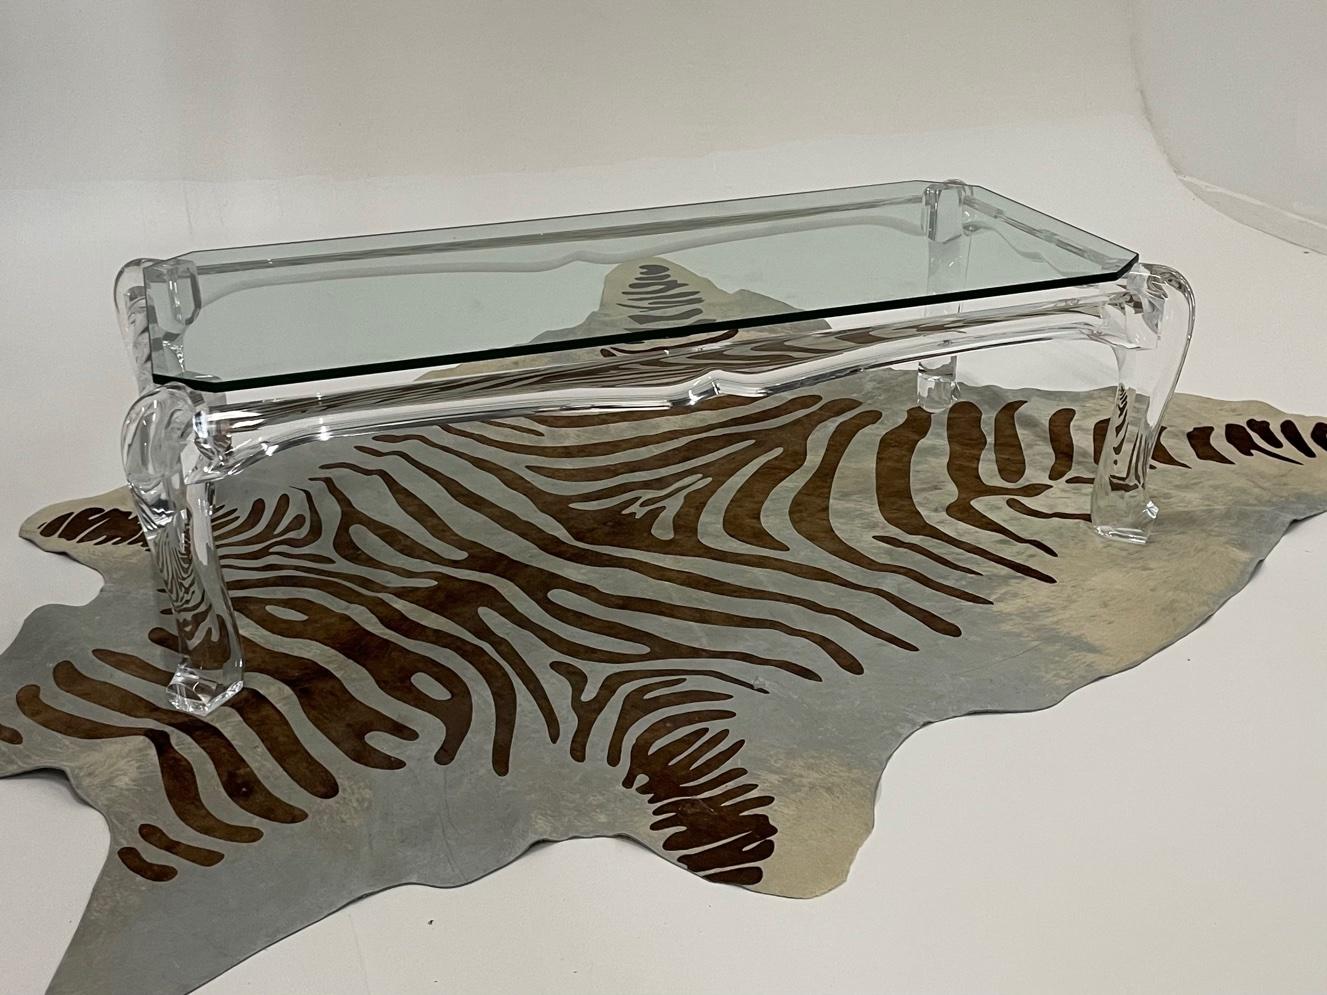 Moviestar glamorous sculptural lucite coffee table having sensational sensual shape, exaggerated cabriole legs and 1/2